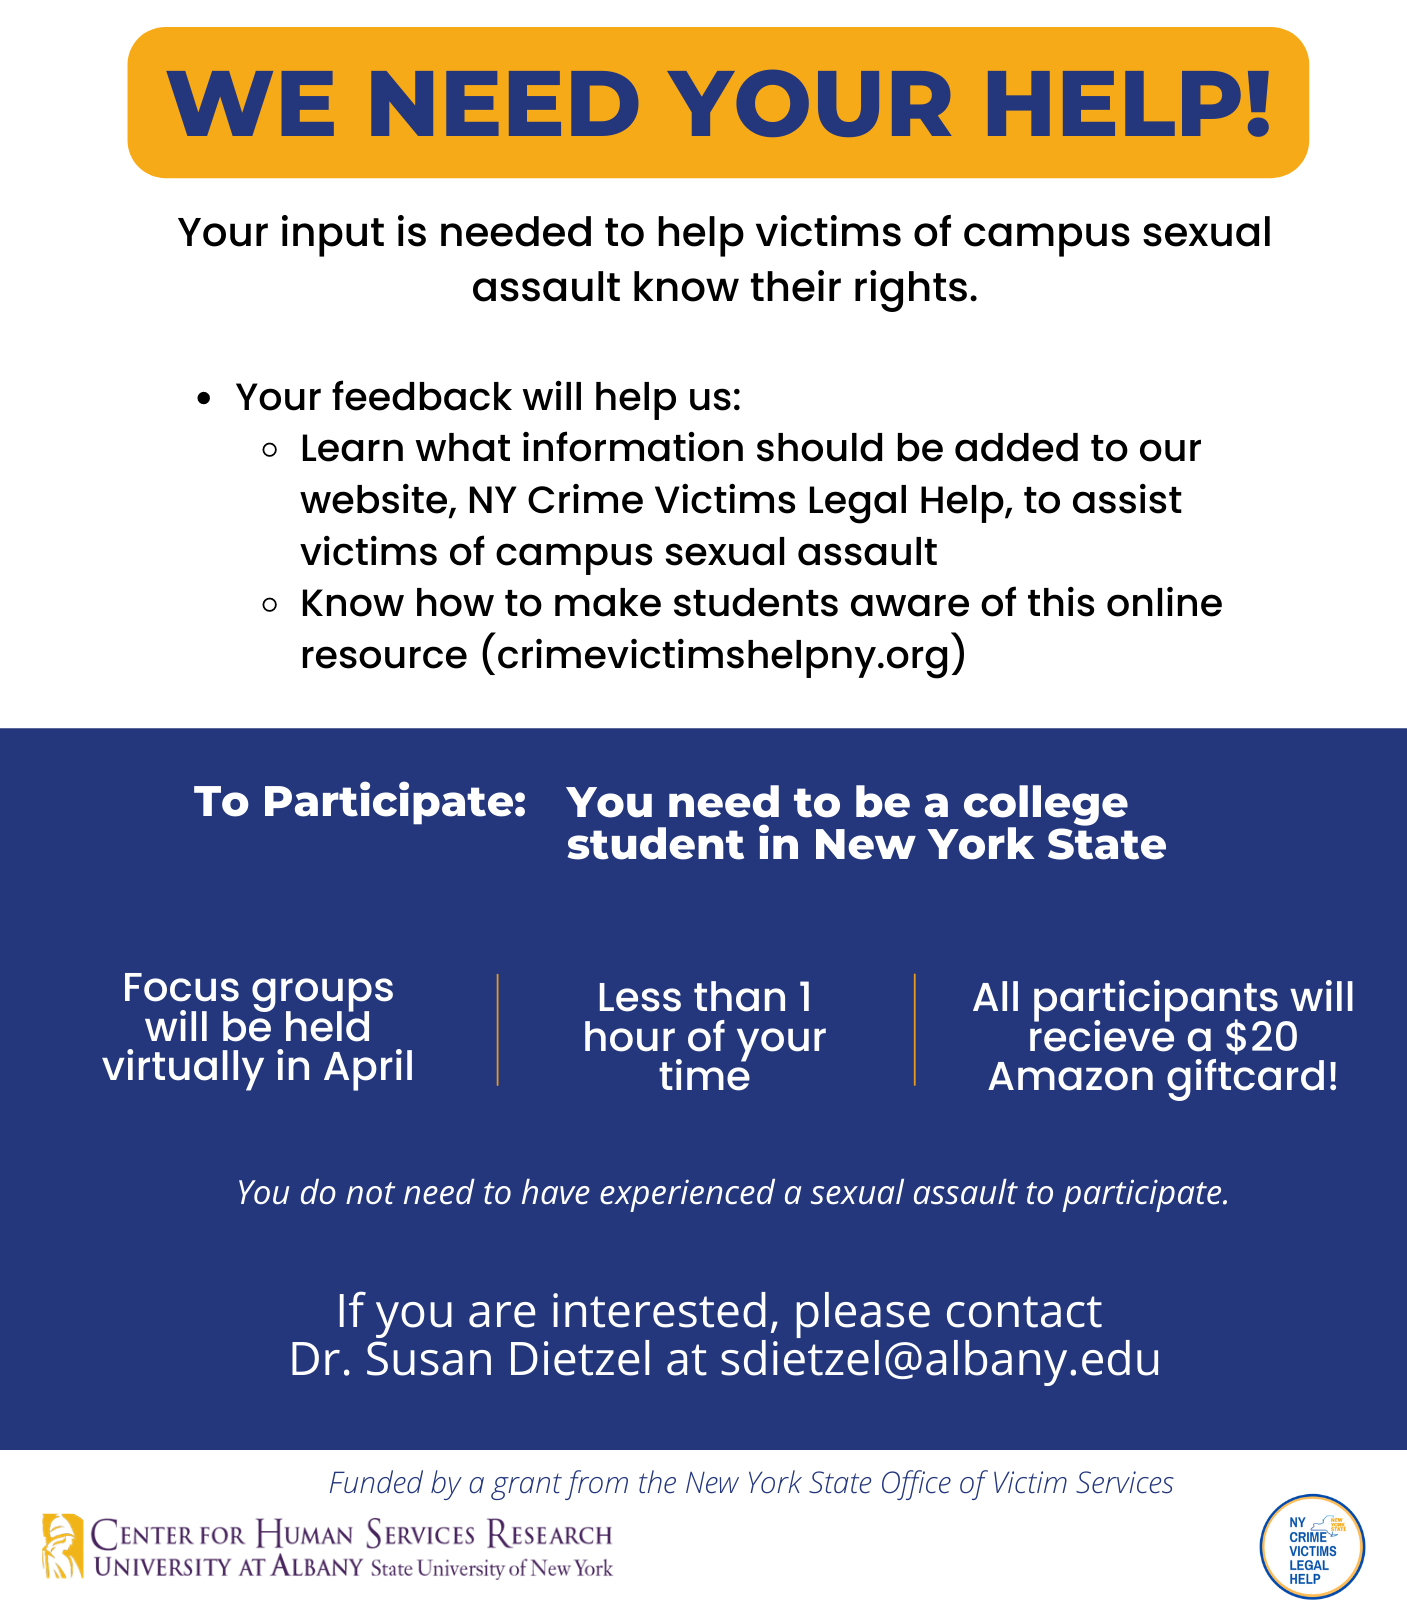 NYS college students and administrators: Help us improve availability of resources and information for victims of campus sexual assault!